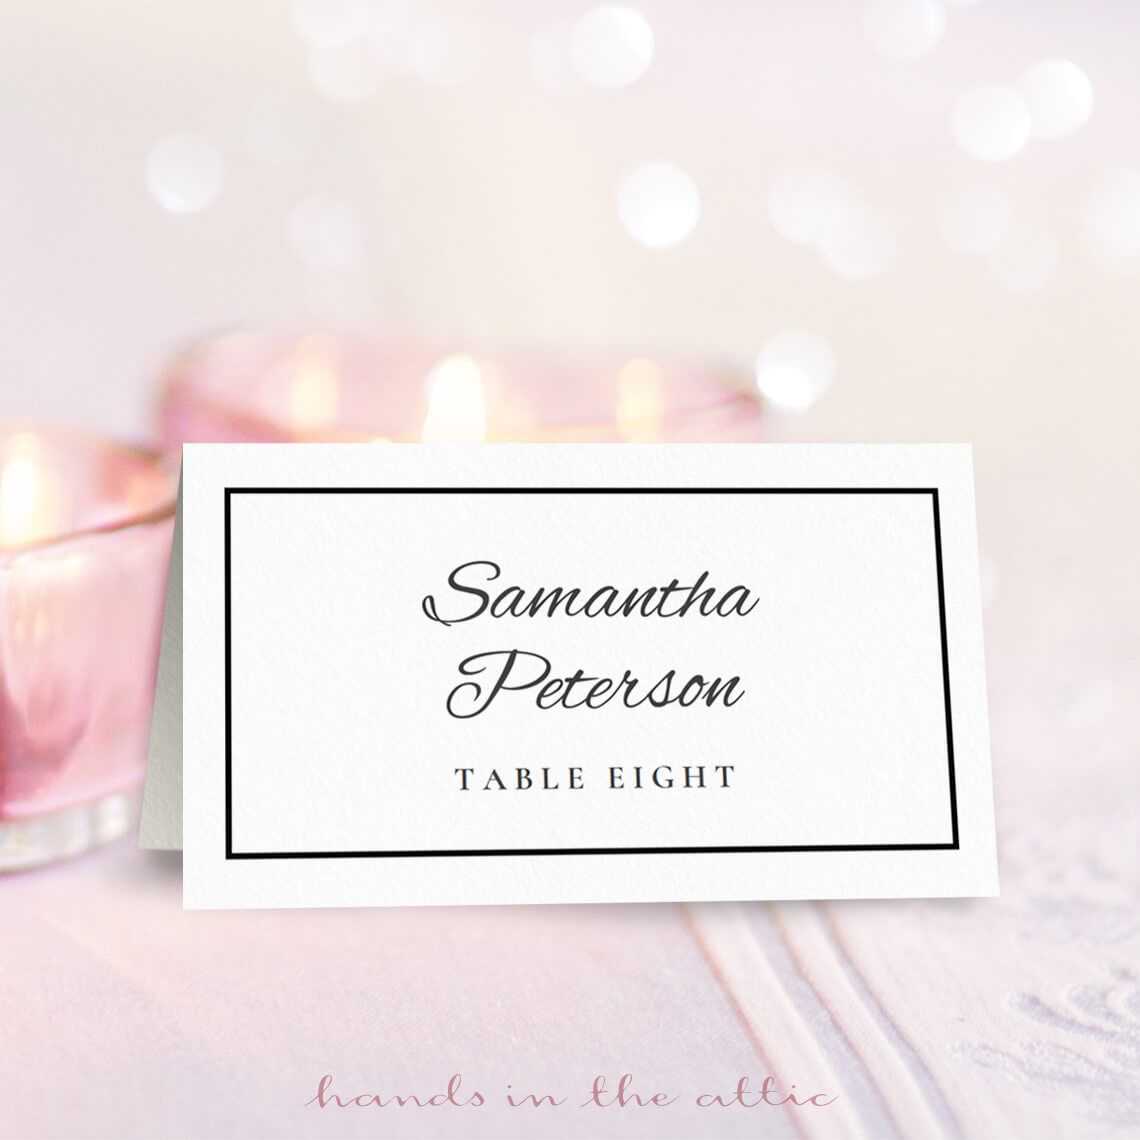 8 Free Wedding Place Card Templates With Regard To Table Reservation Card Template